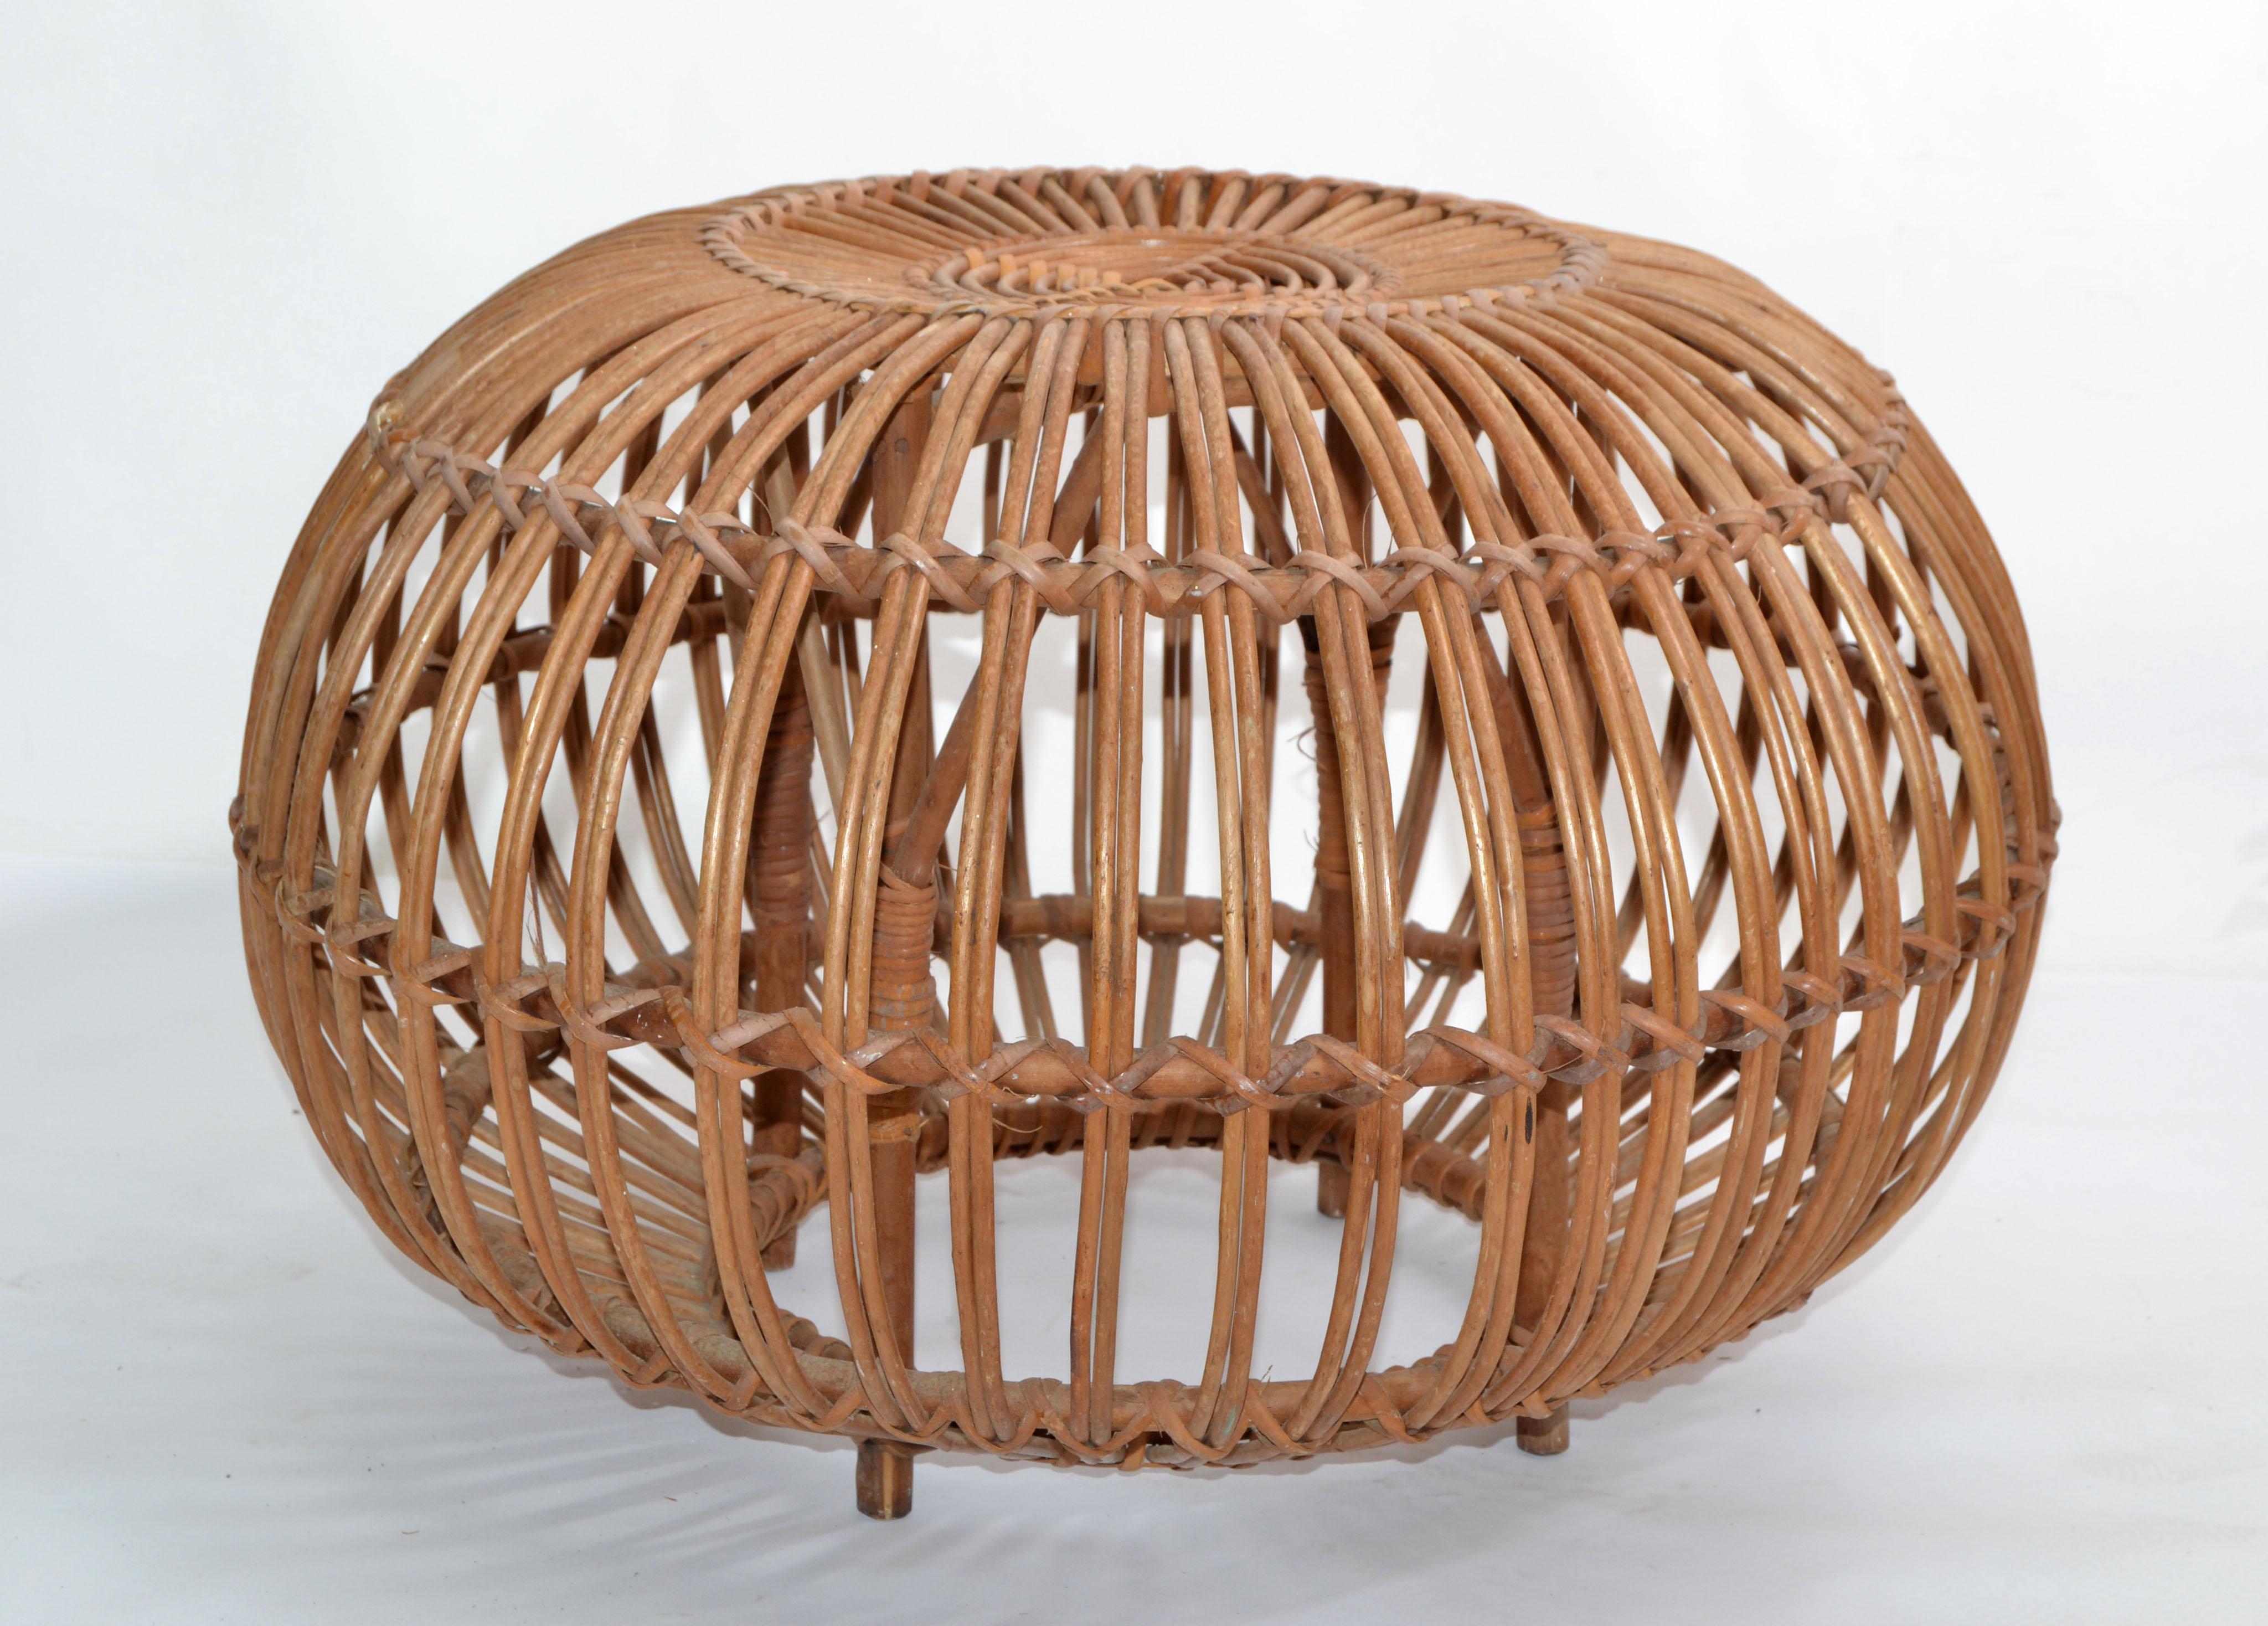 1960s vintage style of Franco Albini & Franca Helg round handwoven rattan, wicker ottoman, pouf, footstool or side table.
Exemplary construction, woven ties are firmly linked.
An iconic design Classic made in Italy.
The Wicker Armchair for the